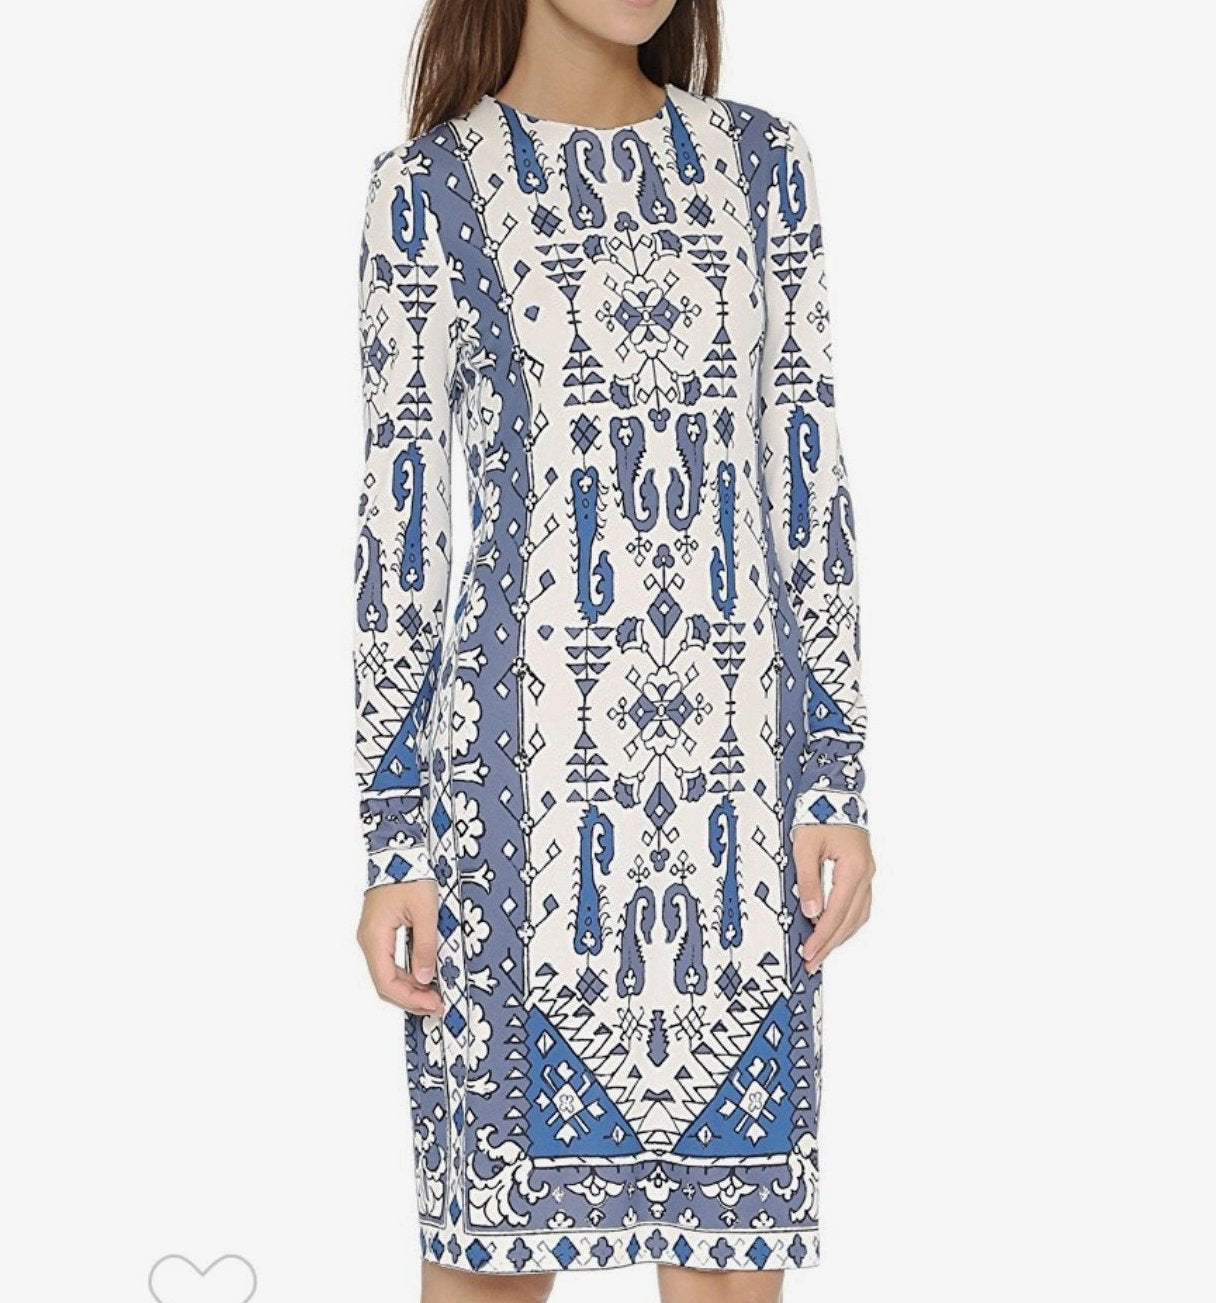 Tory Burch Printed Jersey Dress - CHIC Kuwait Luxury Outlet